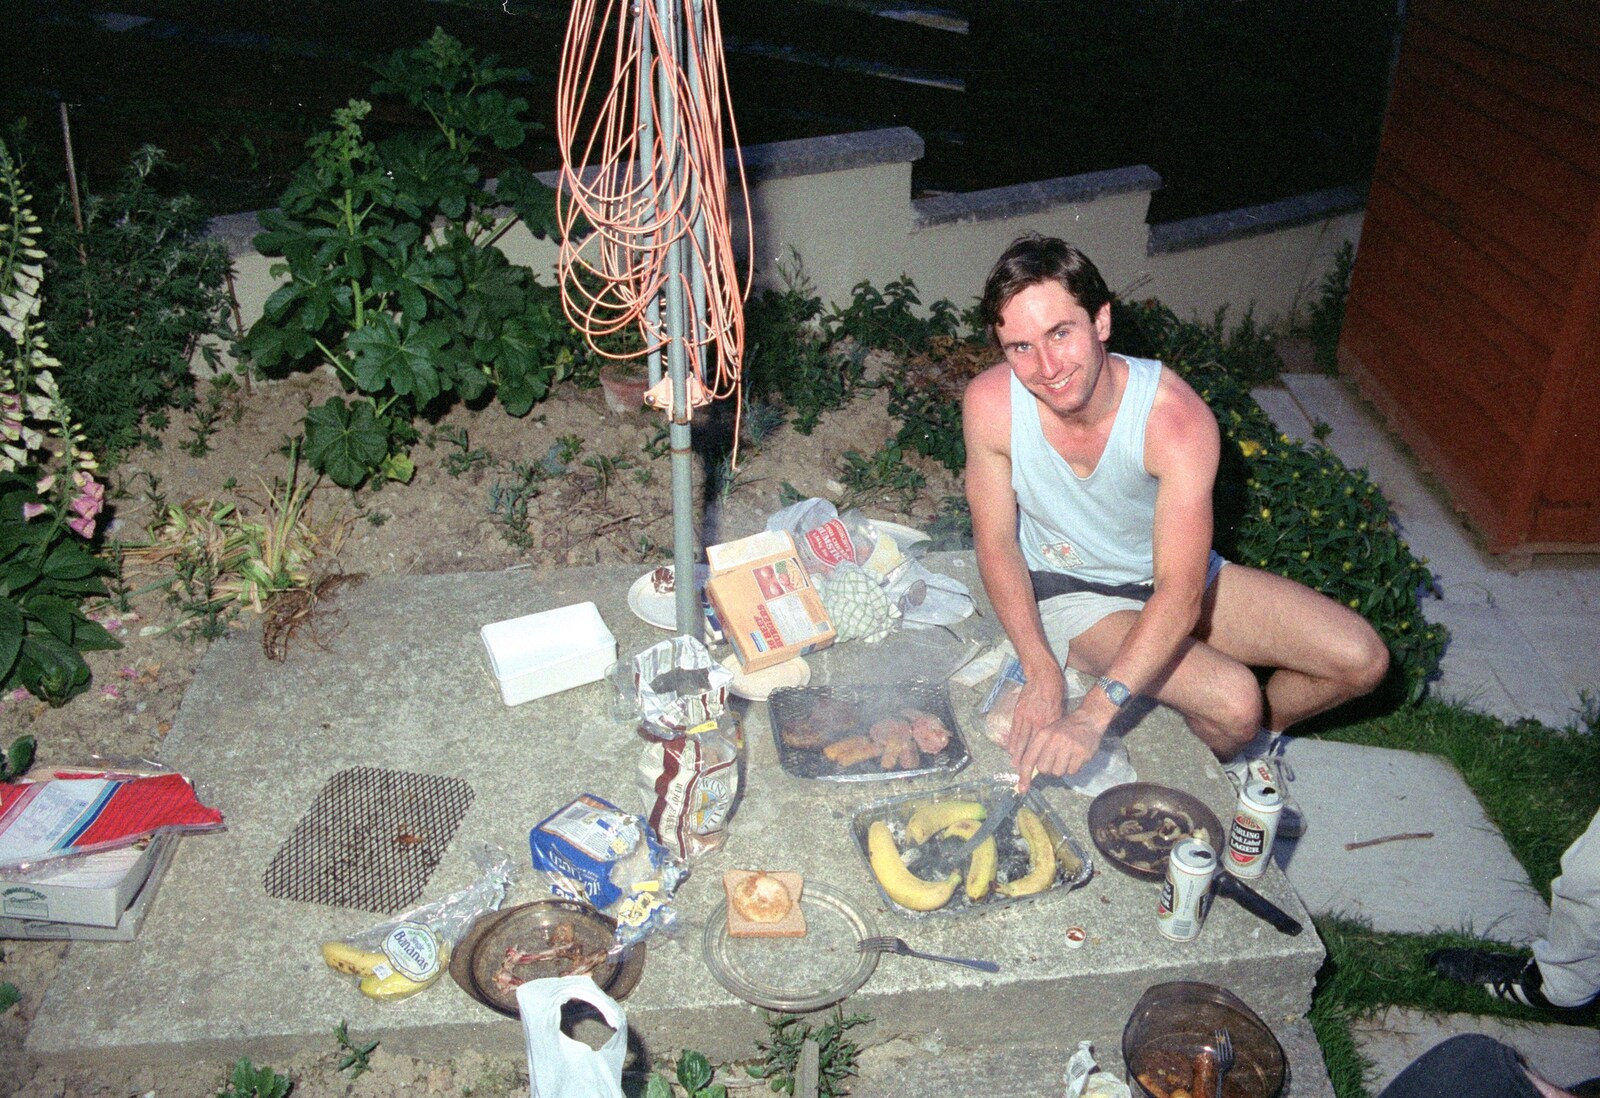 Riki cooks up some burgers and bananas from Uni: Riki's Barbeque and Dobbs' Jitsu, Plymouth, Devon - 2nd June 1989